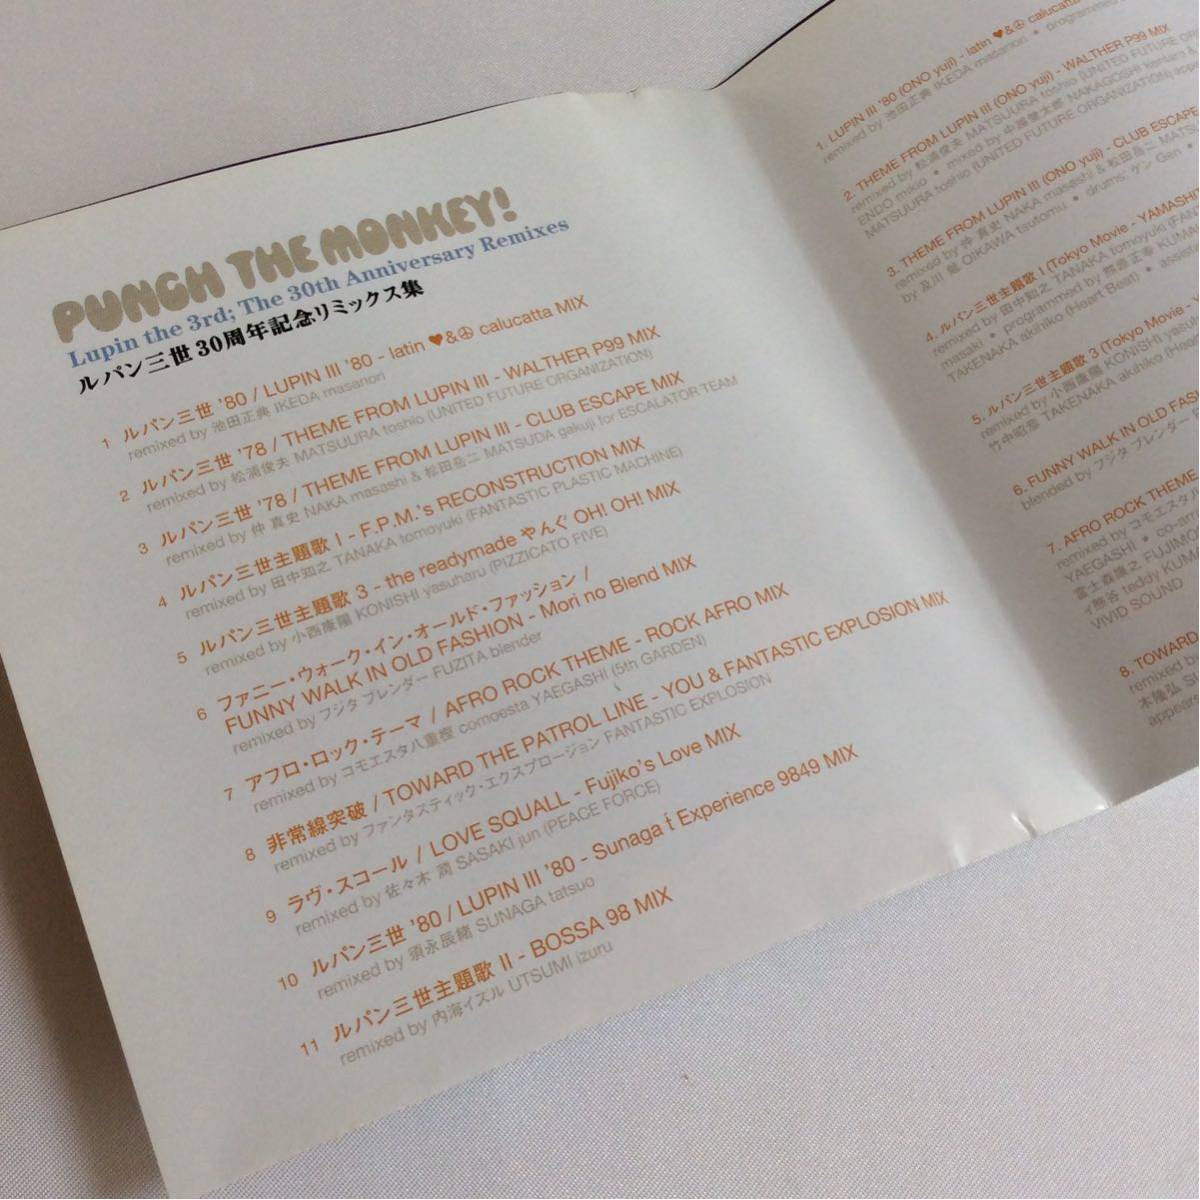  domestic record / PUNCH THE MONKEY / Lupin III 30 anniversary commemoration remix compilation / CD / with belt / 1998 / COCA-15143 /